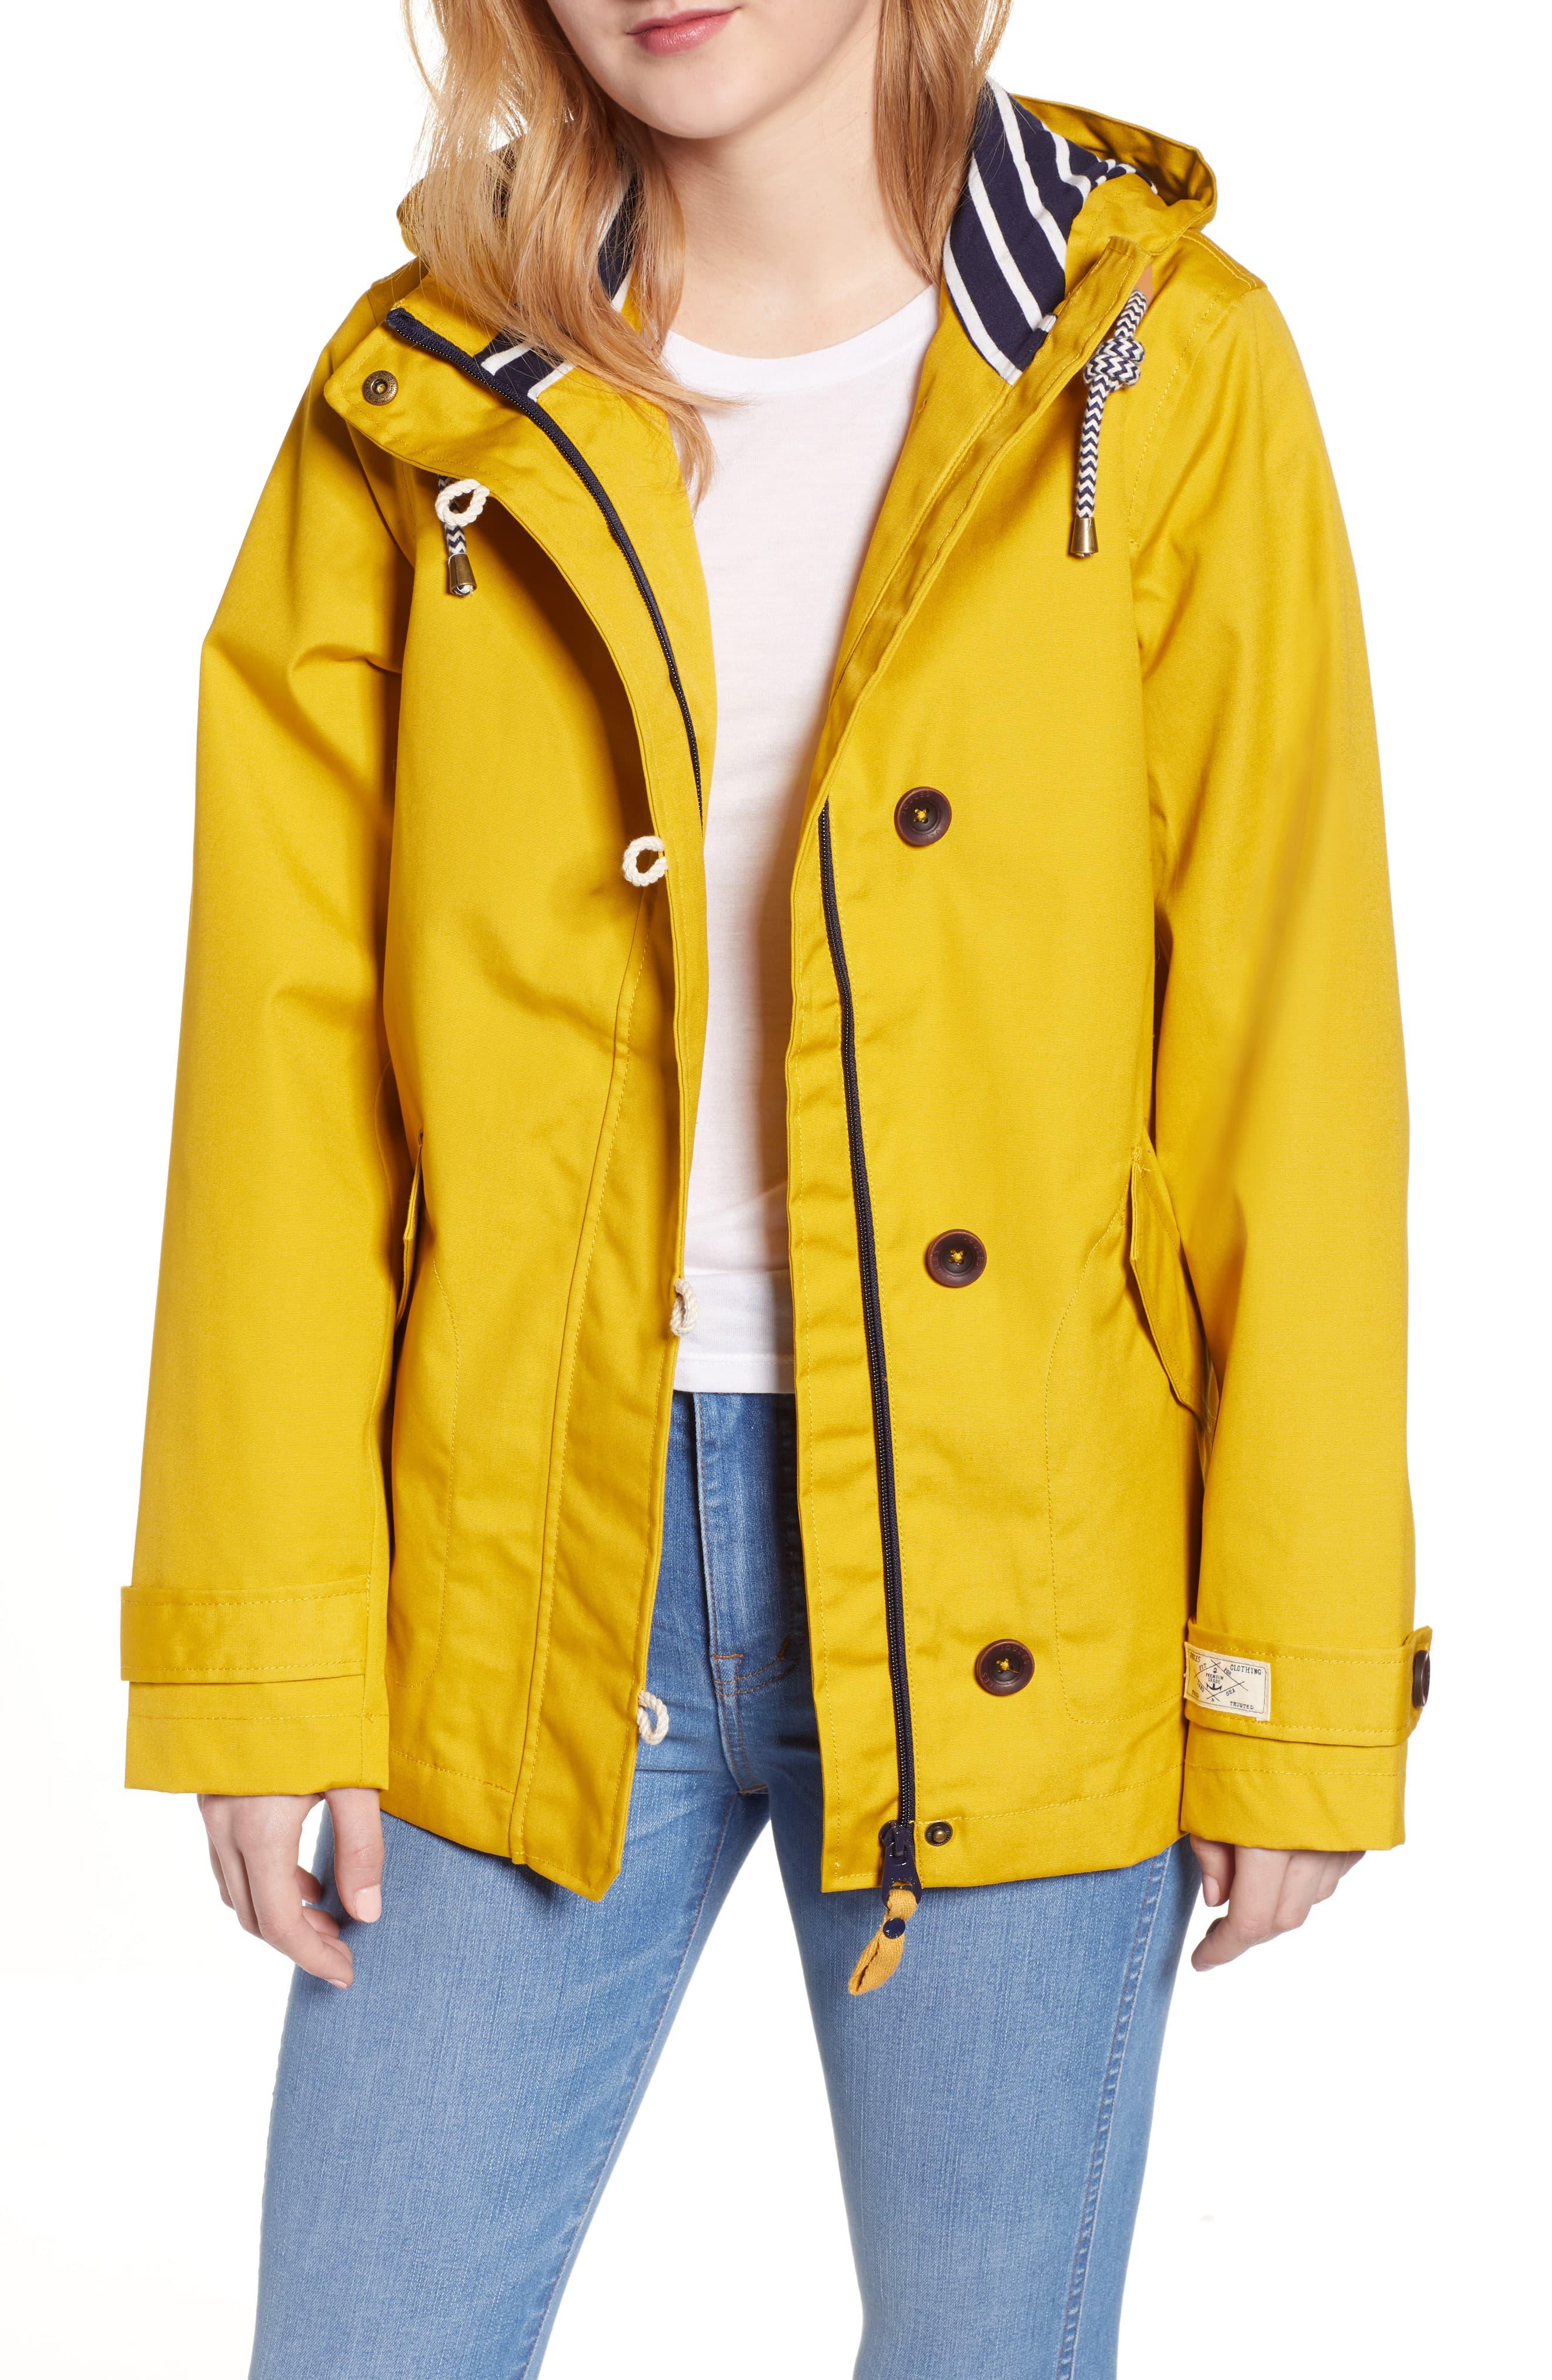 Joules Coast Waterproof Hooded Jacket in Antique Gold (Yellow) - Lyst